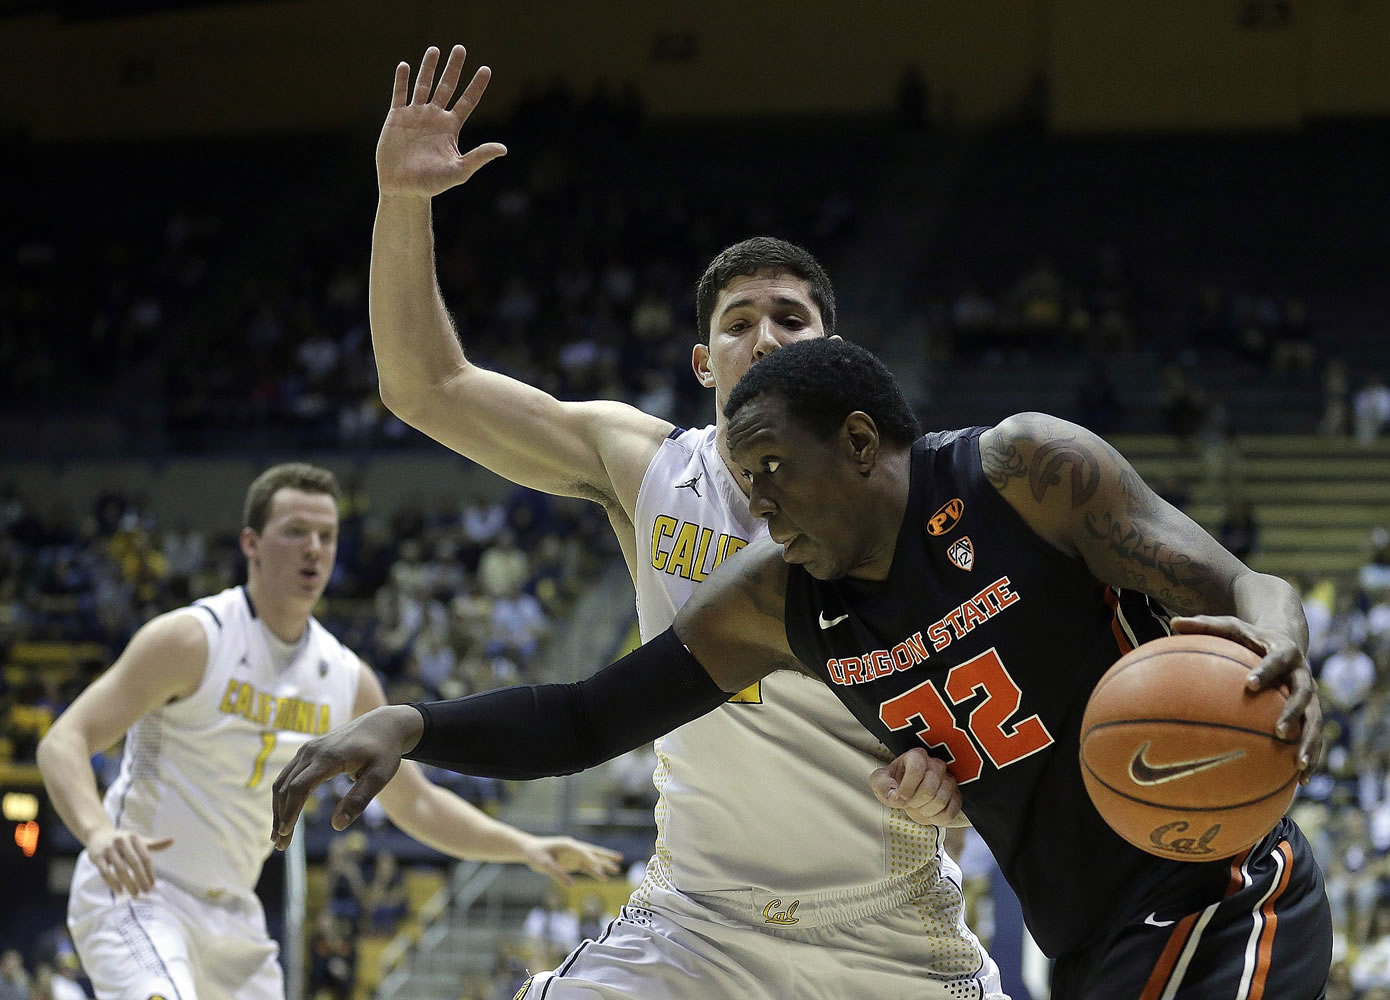 Oregon State's Jarmal Reid (32), right, drives the ball against California's Sam Singer in the first half Sunday, March 1, 2015, in Berkeley, Calif.